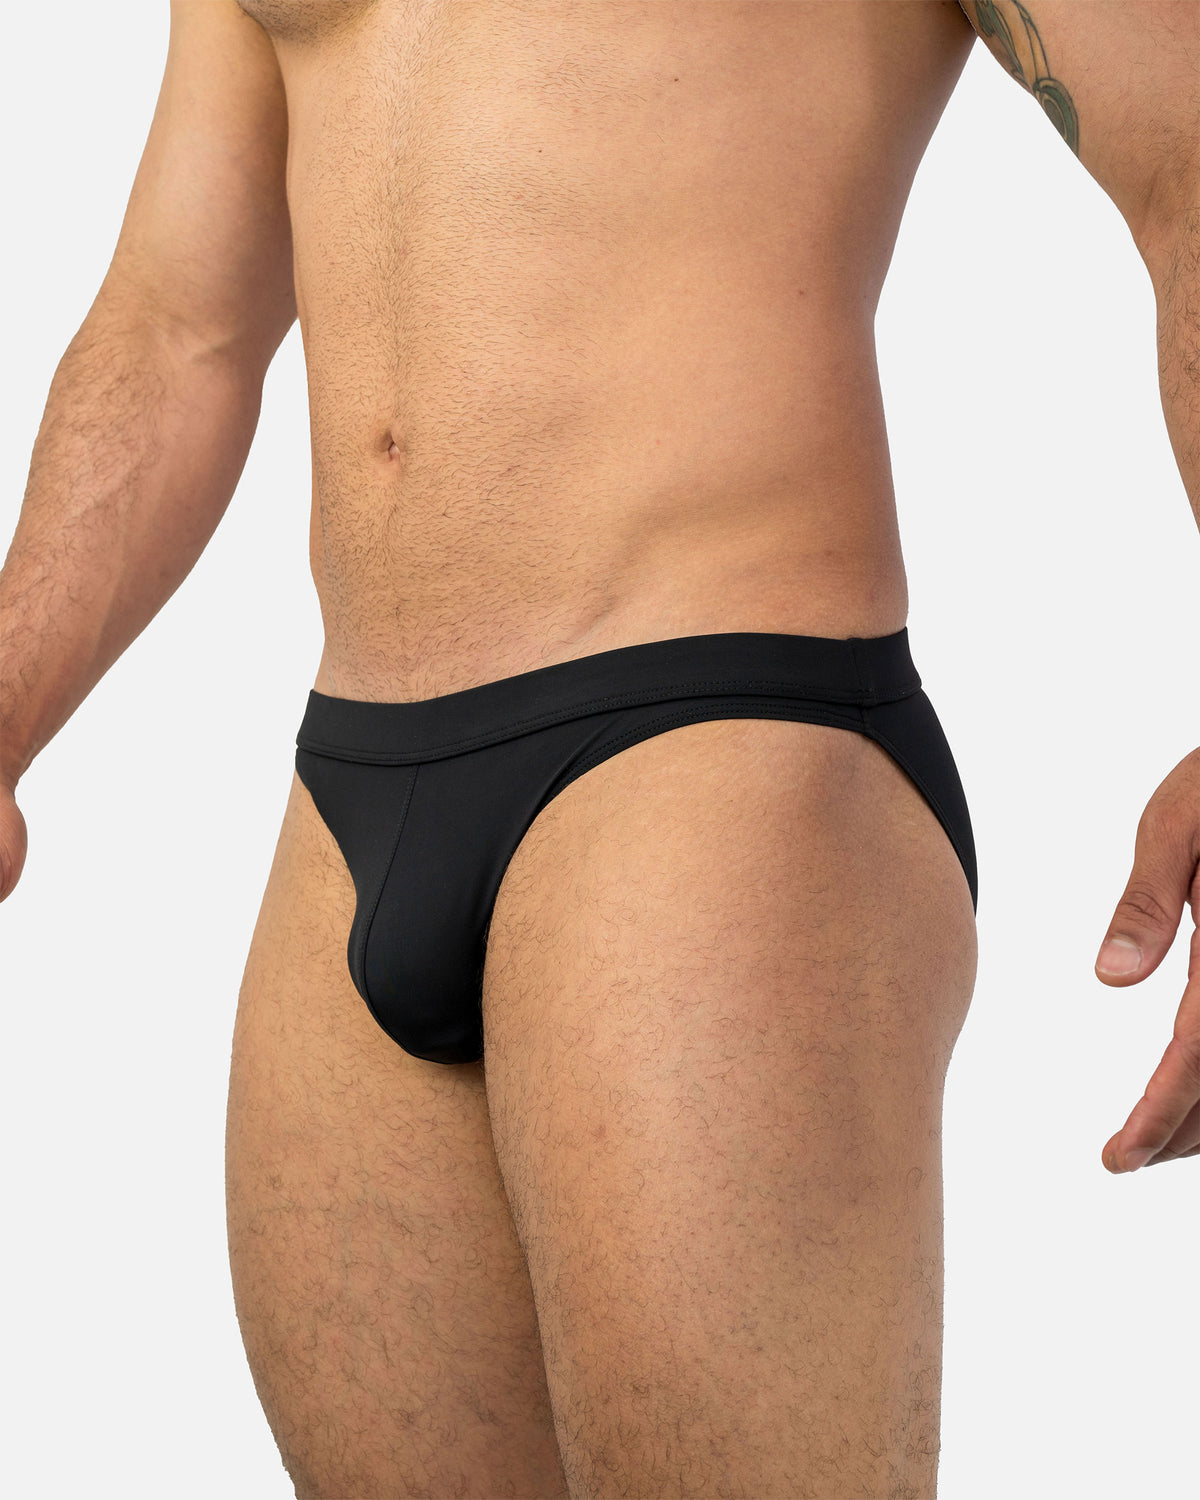 Browse Thongs & Undies products in For Him at